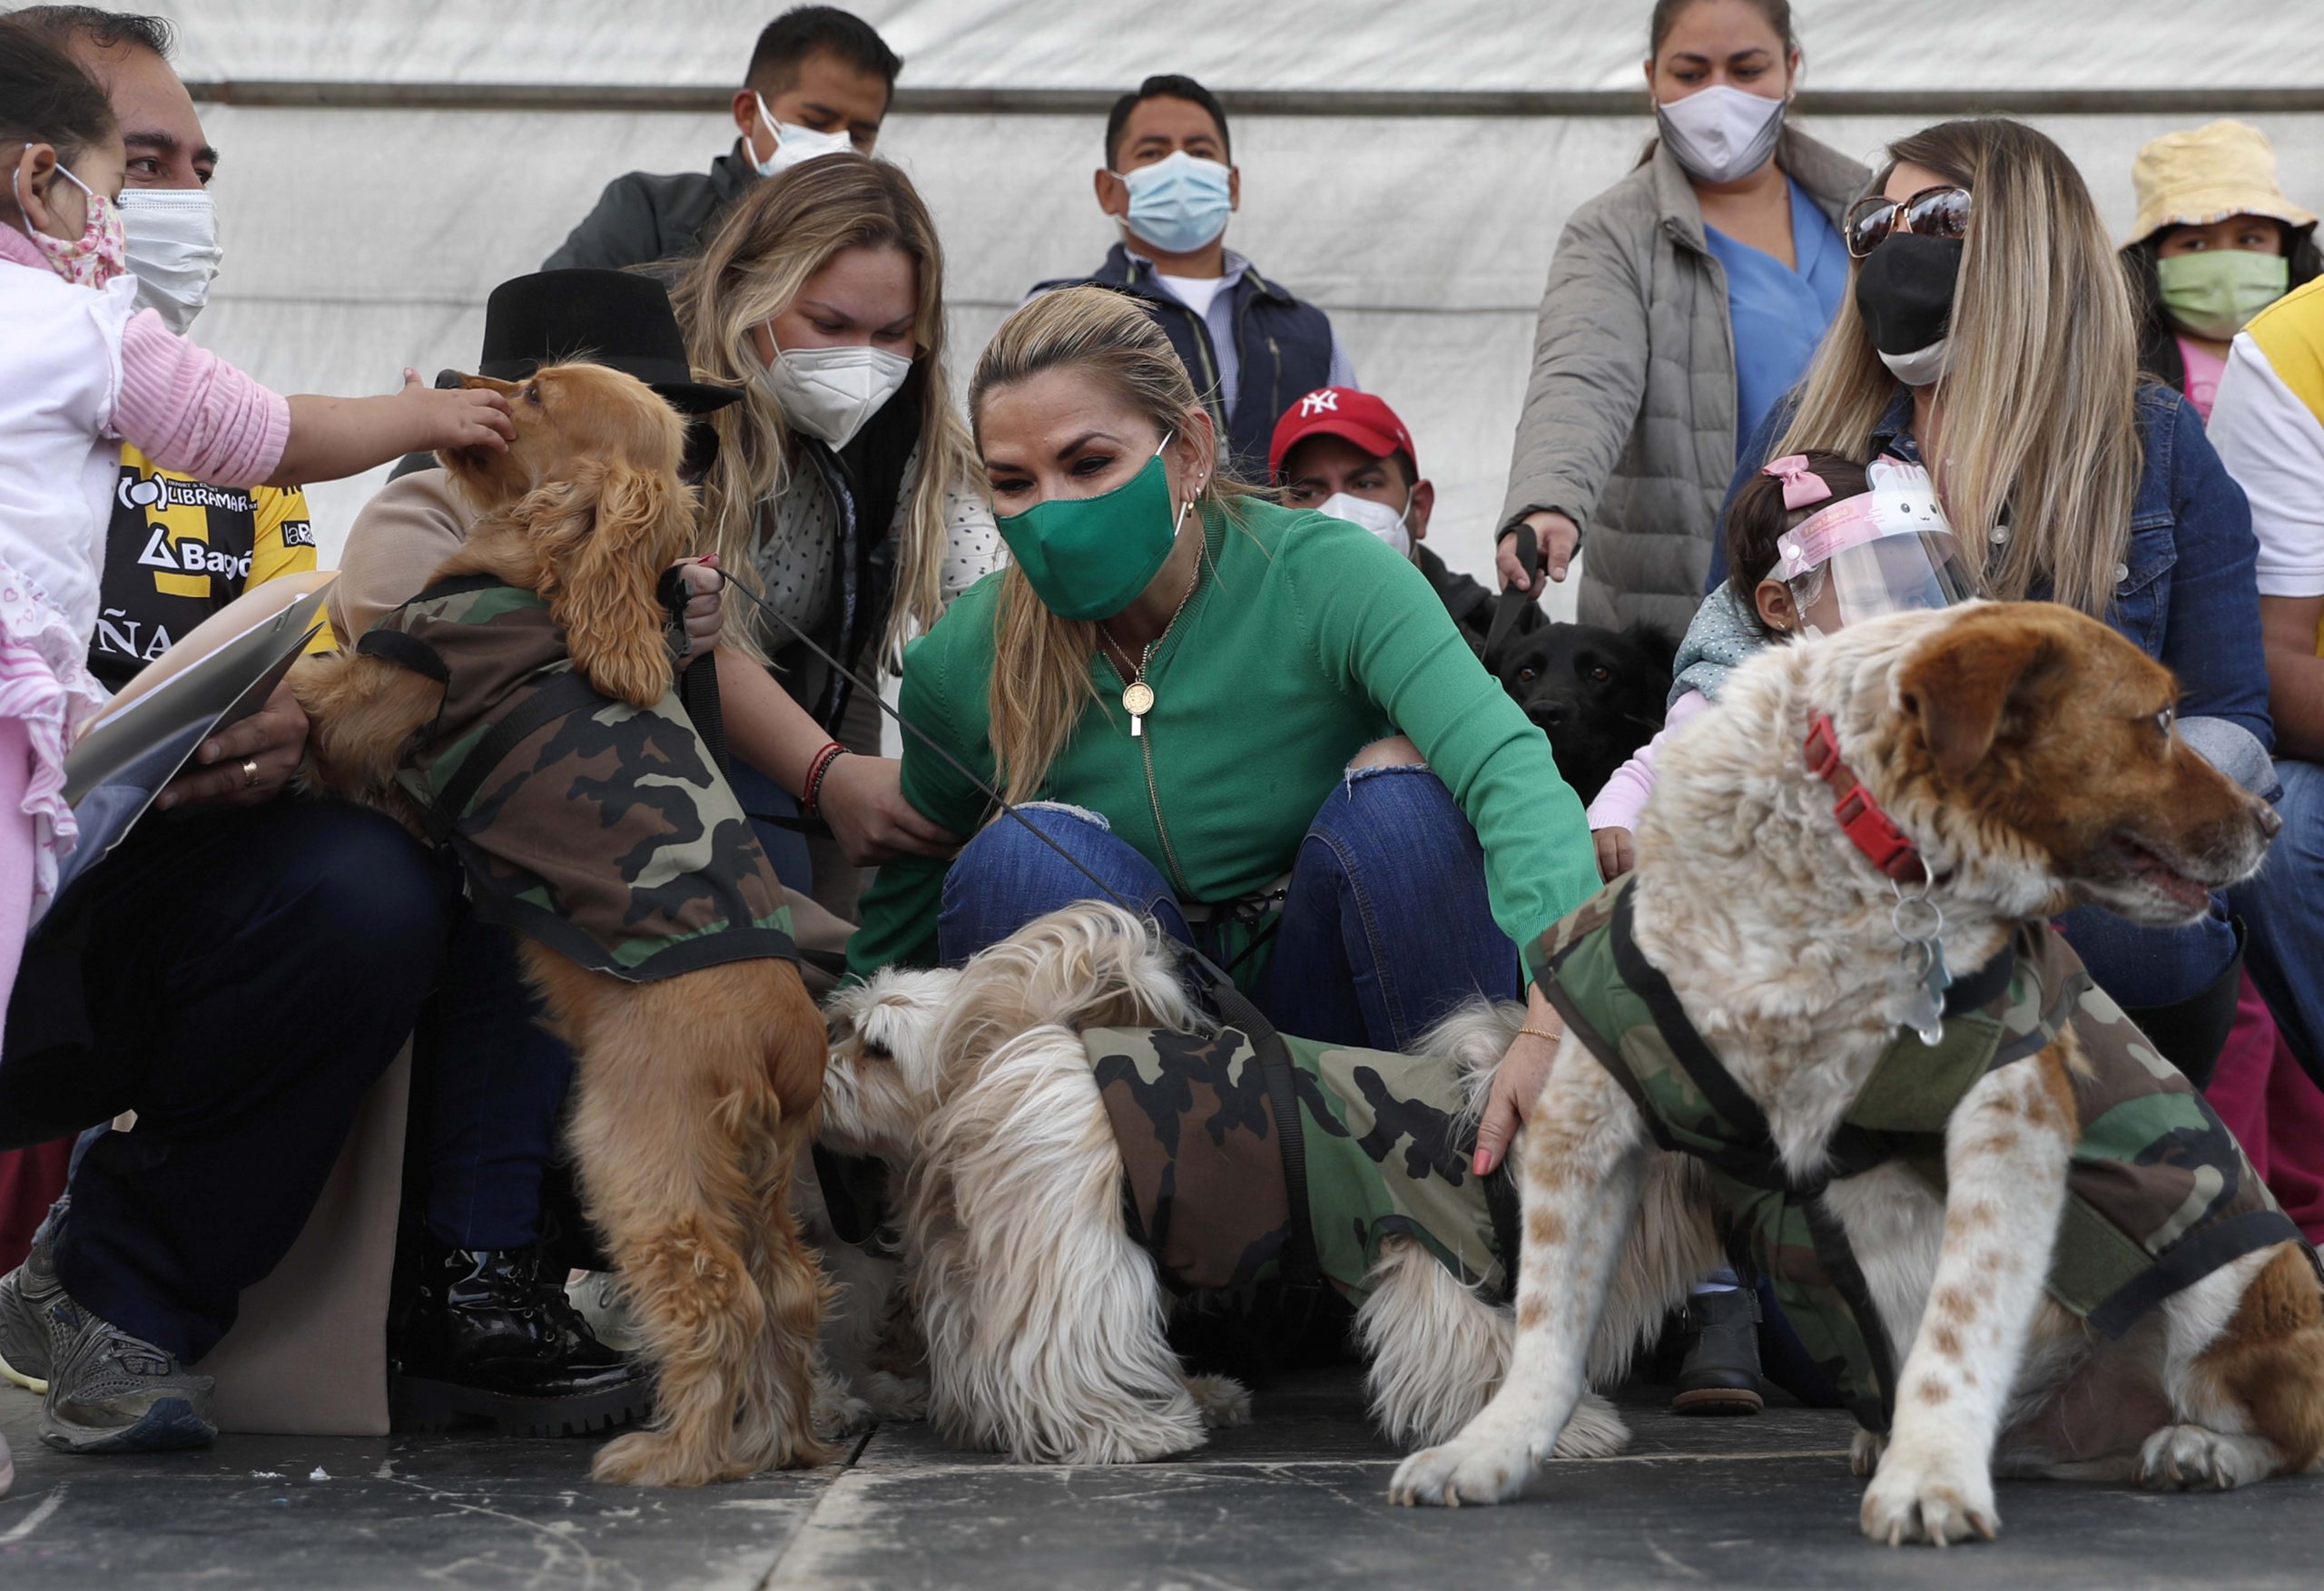 South Korea plans legal status for animals in bid to stop abuse